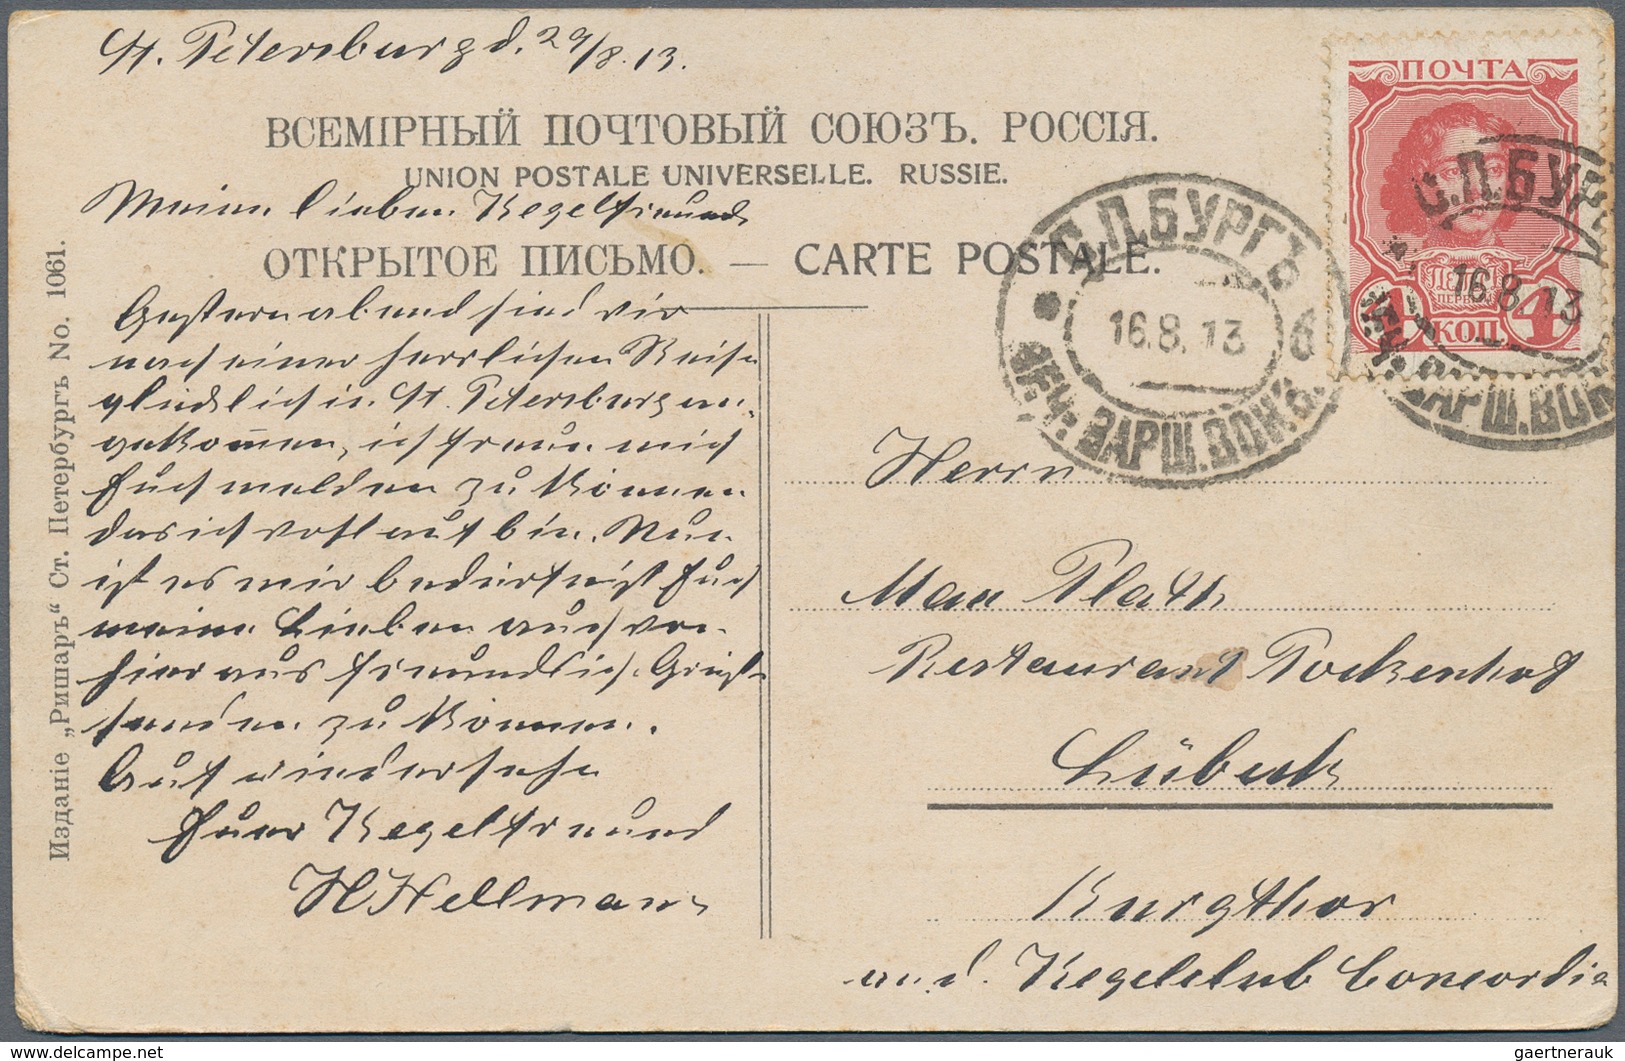 Russland: 1875/1990 ancient holding of ca. 1.070 letters, cards, forms and postal stationeries (post